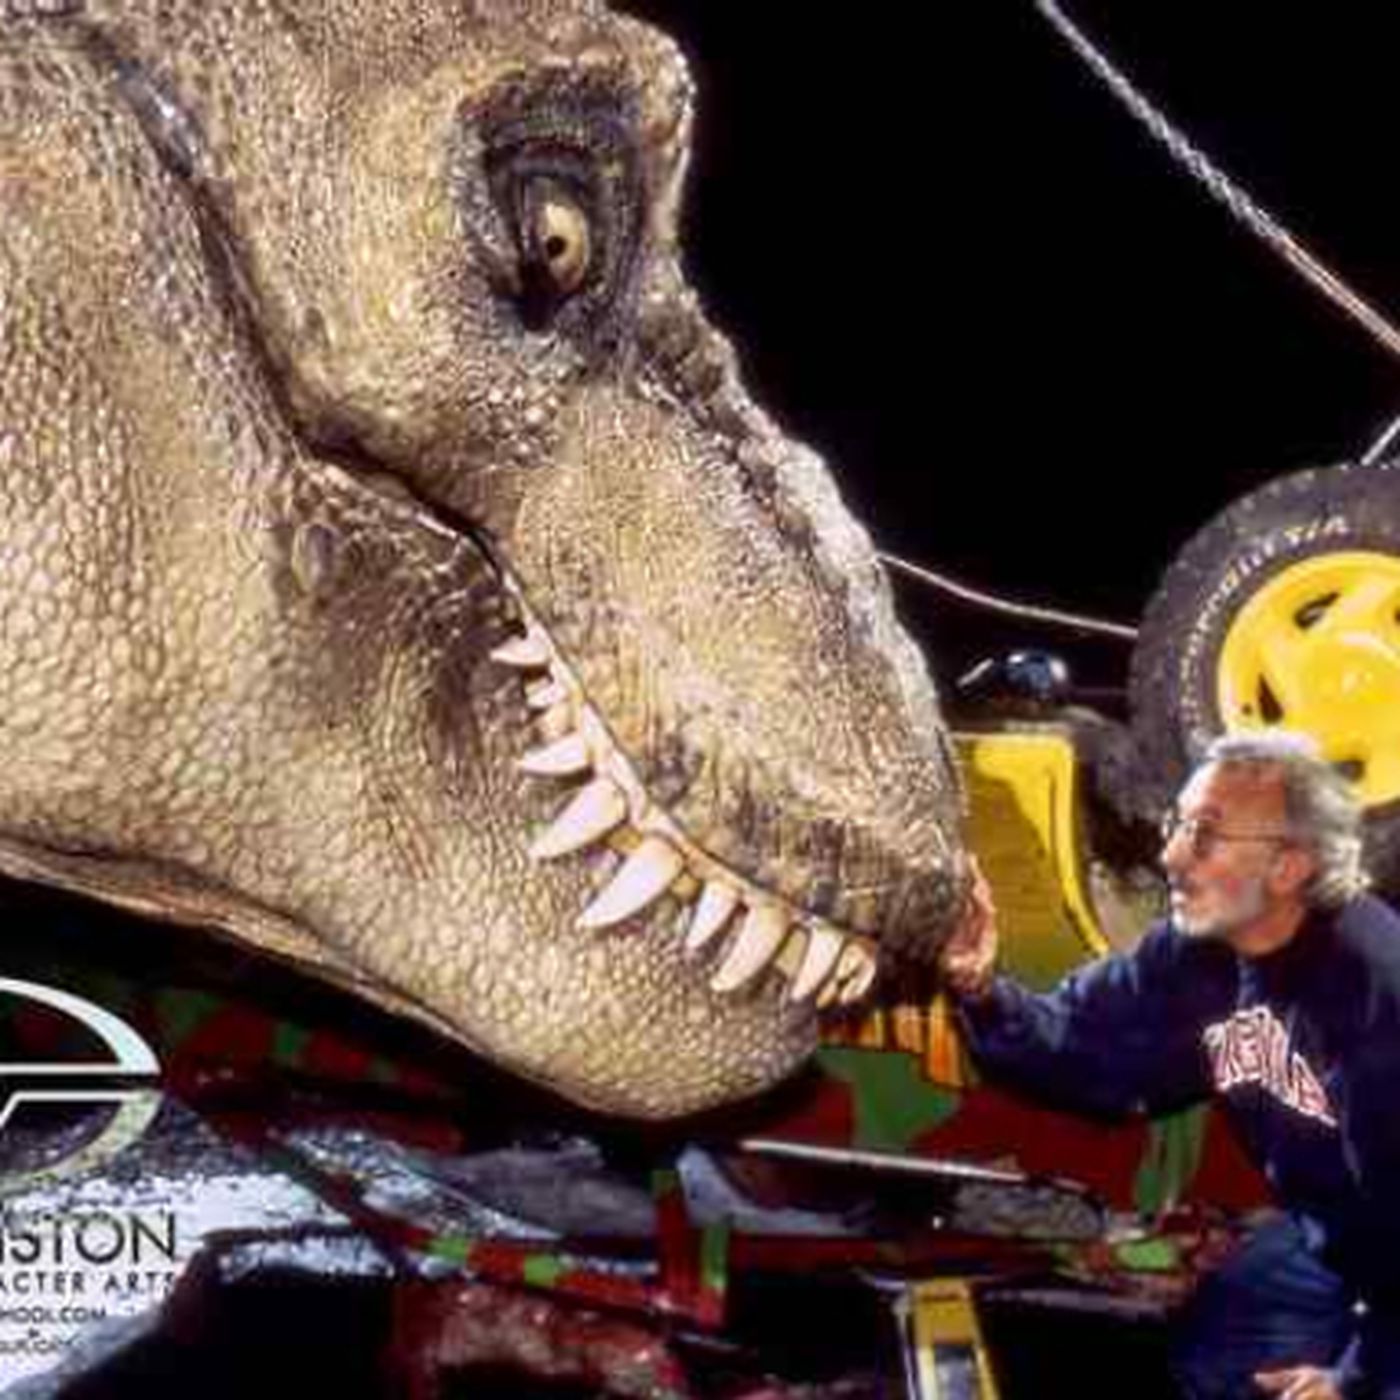 Watch 'Jurassic Park' engineers build the movie's giant mechanical